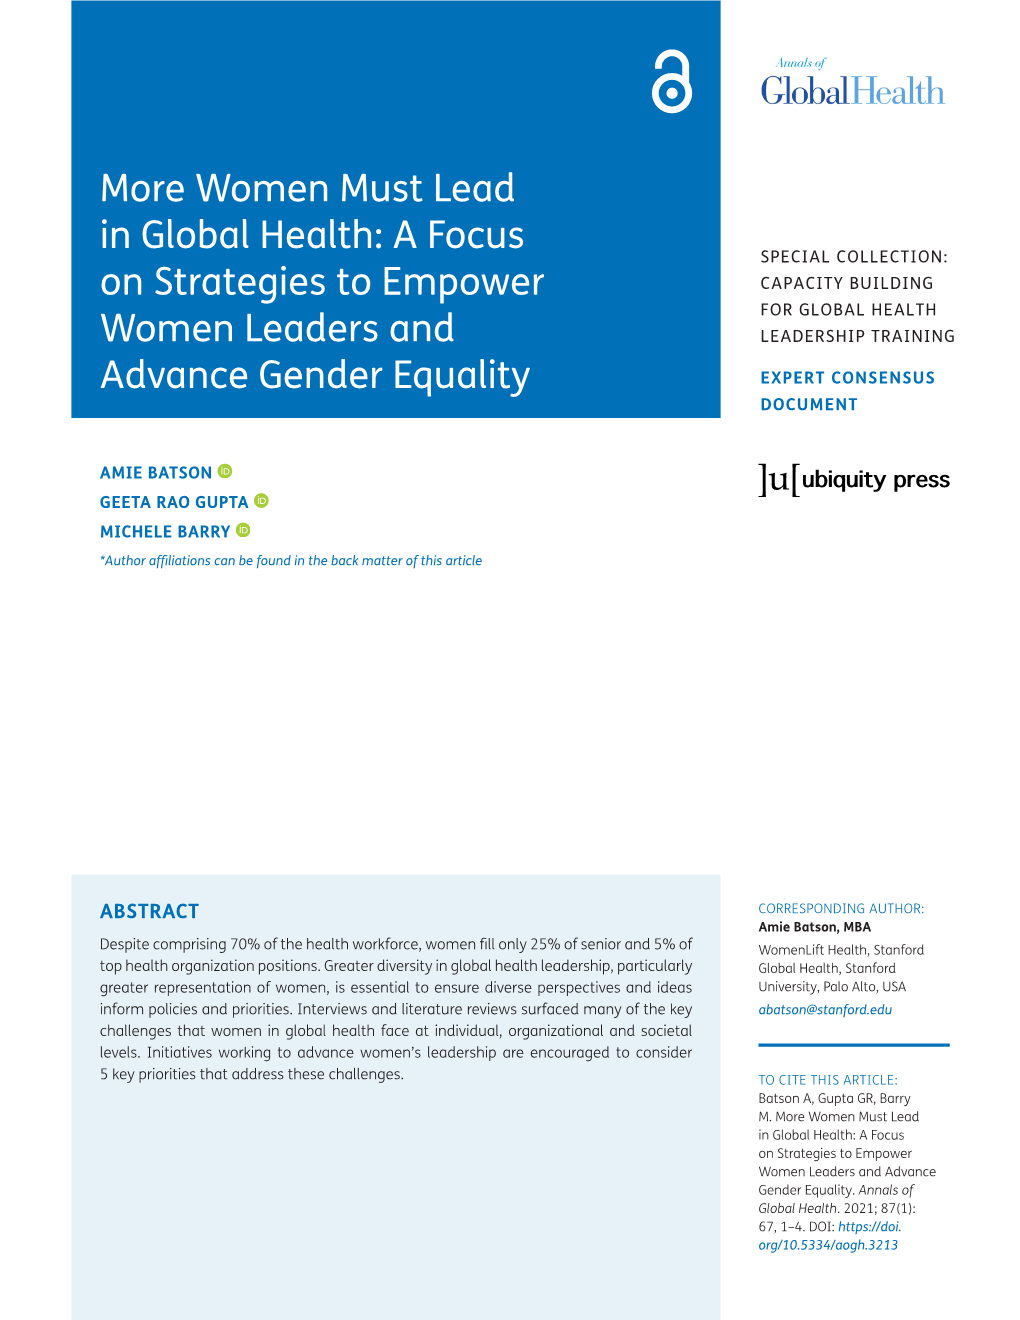 A Focus on Strategies to Empower Women Leaders and Advance Gender Equality